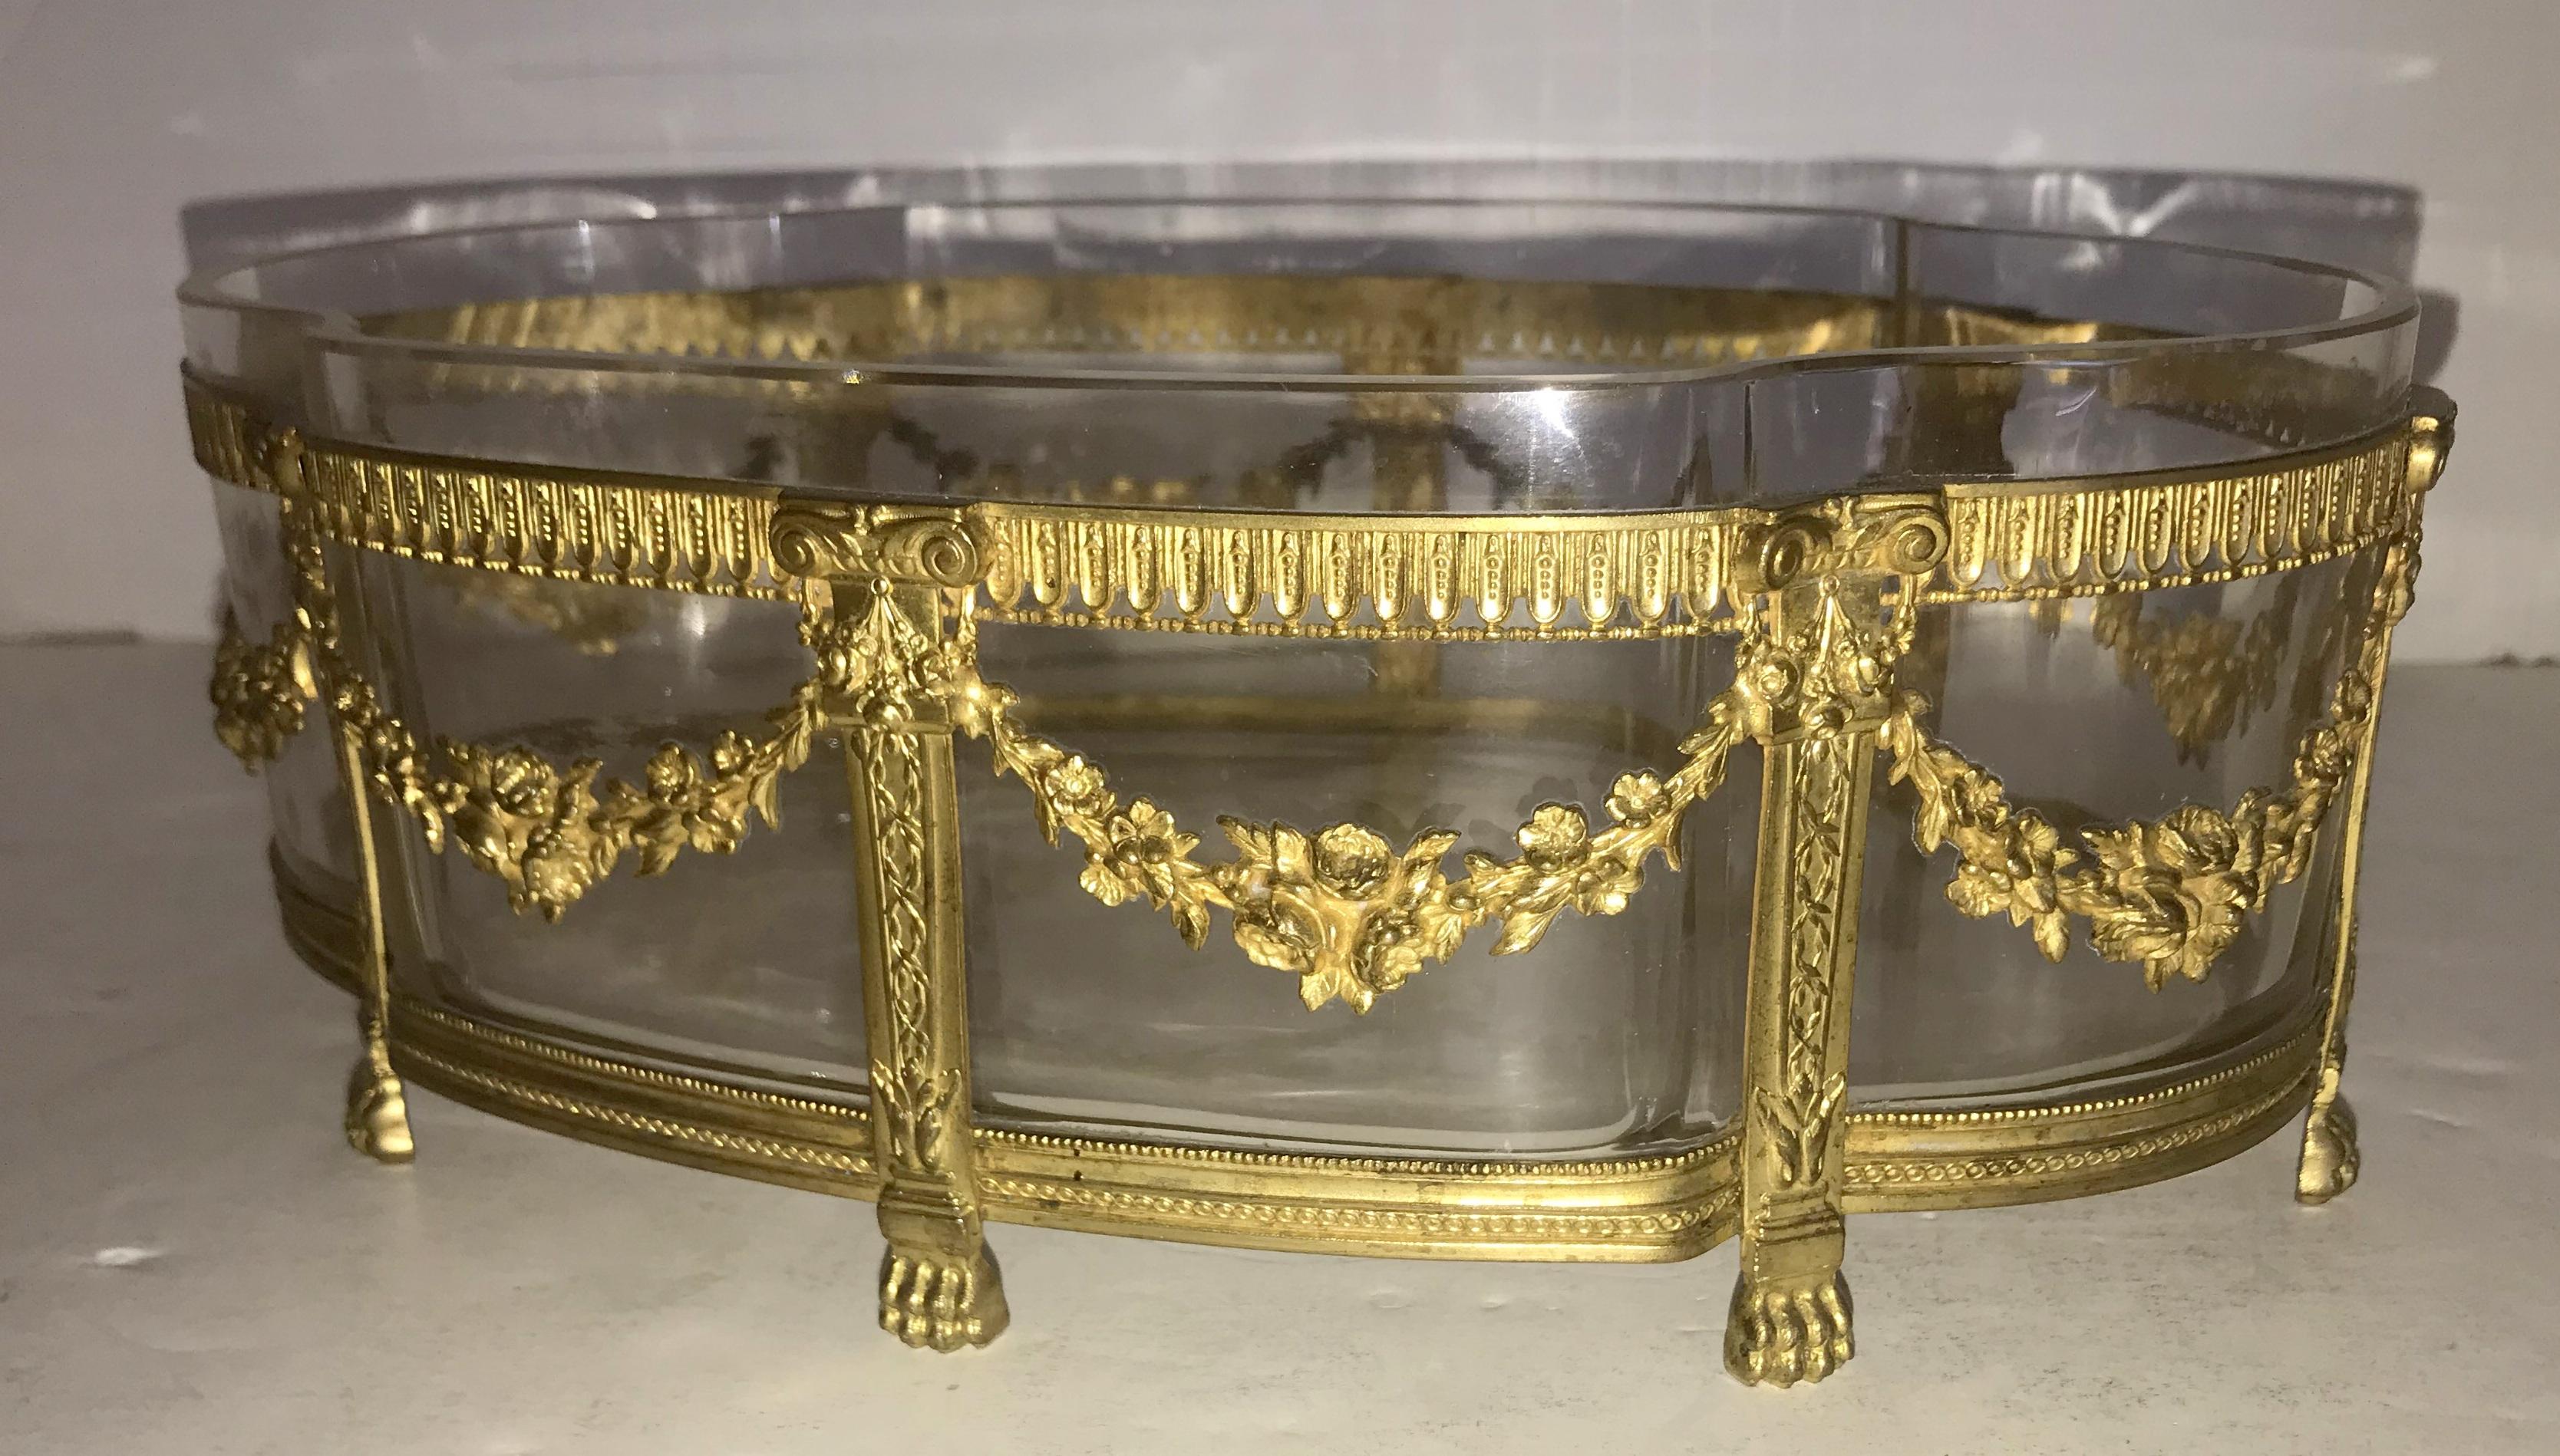 A wonderful French gilt bronze and crystal oval centerpiece decorated with wreaths and swags ormolu-mounted and raised on paw feet.